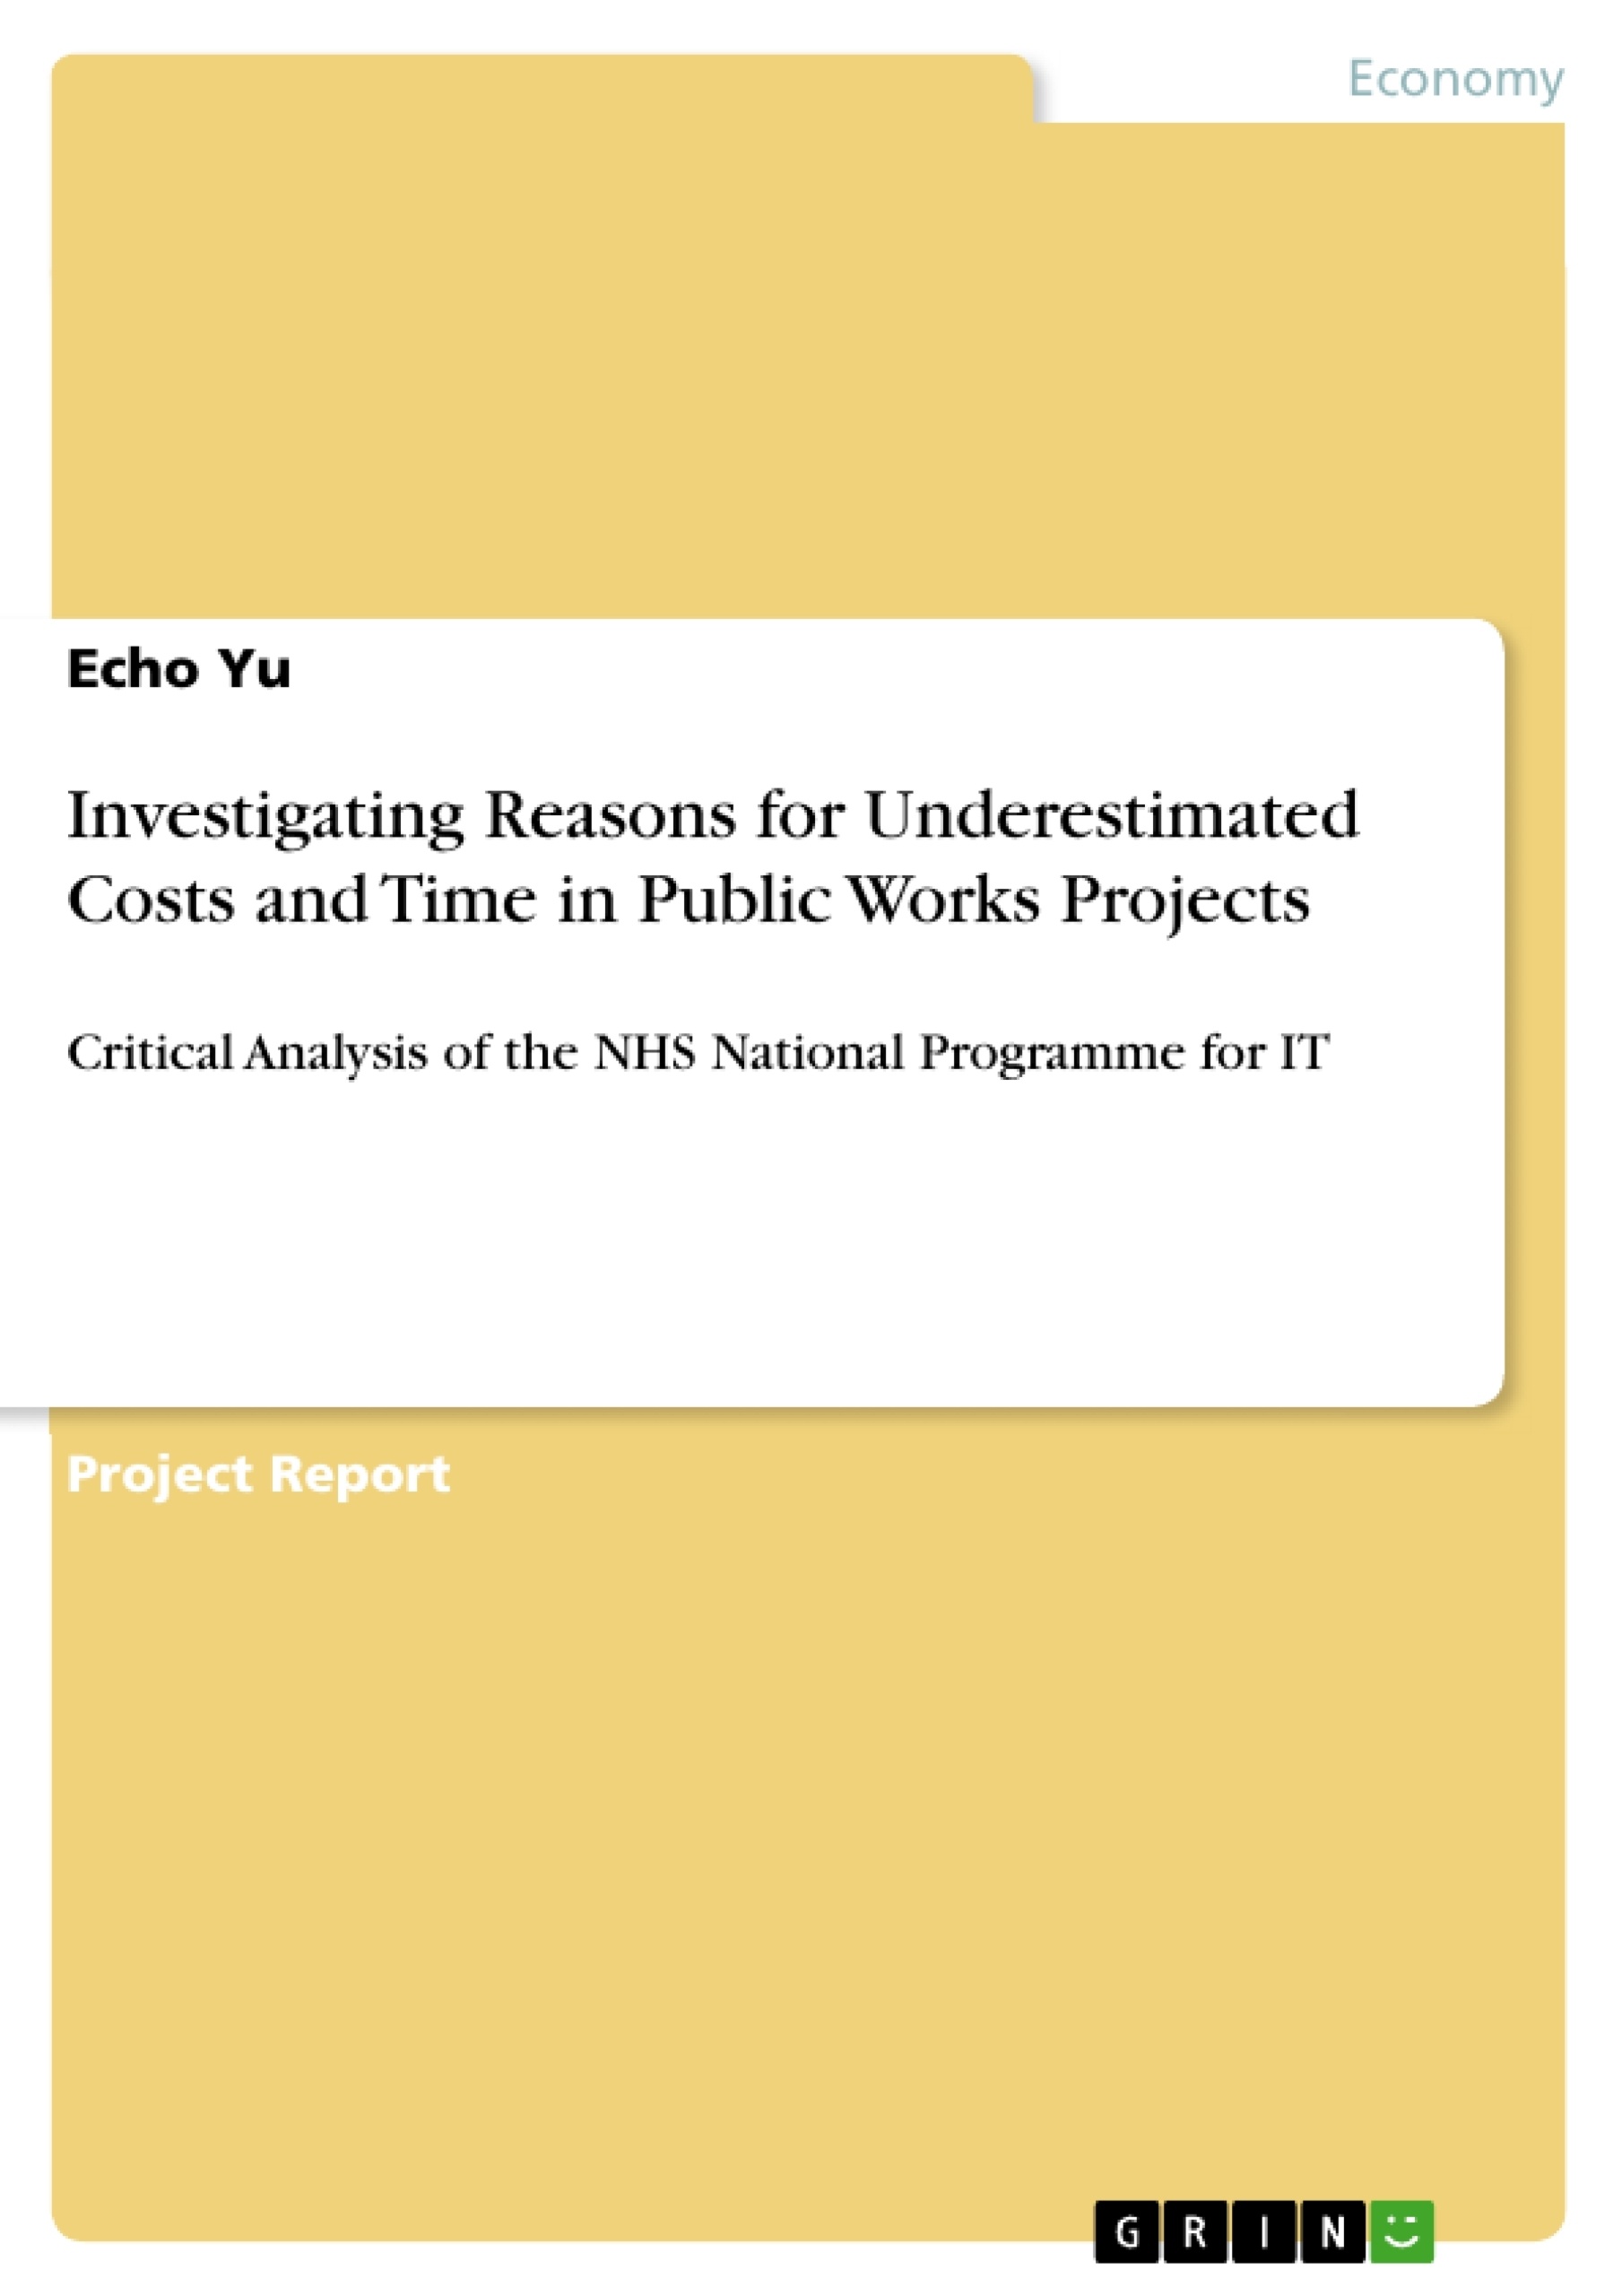 Titre: Investigating Reasons for Underestimated Costs and Time in Public Works Projects